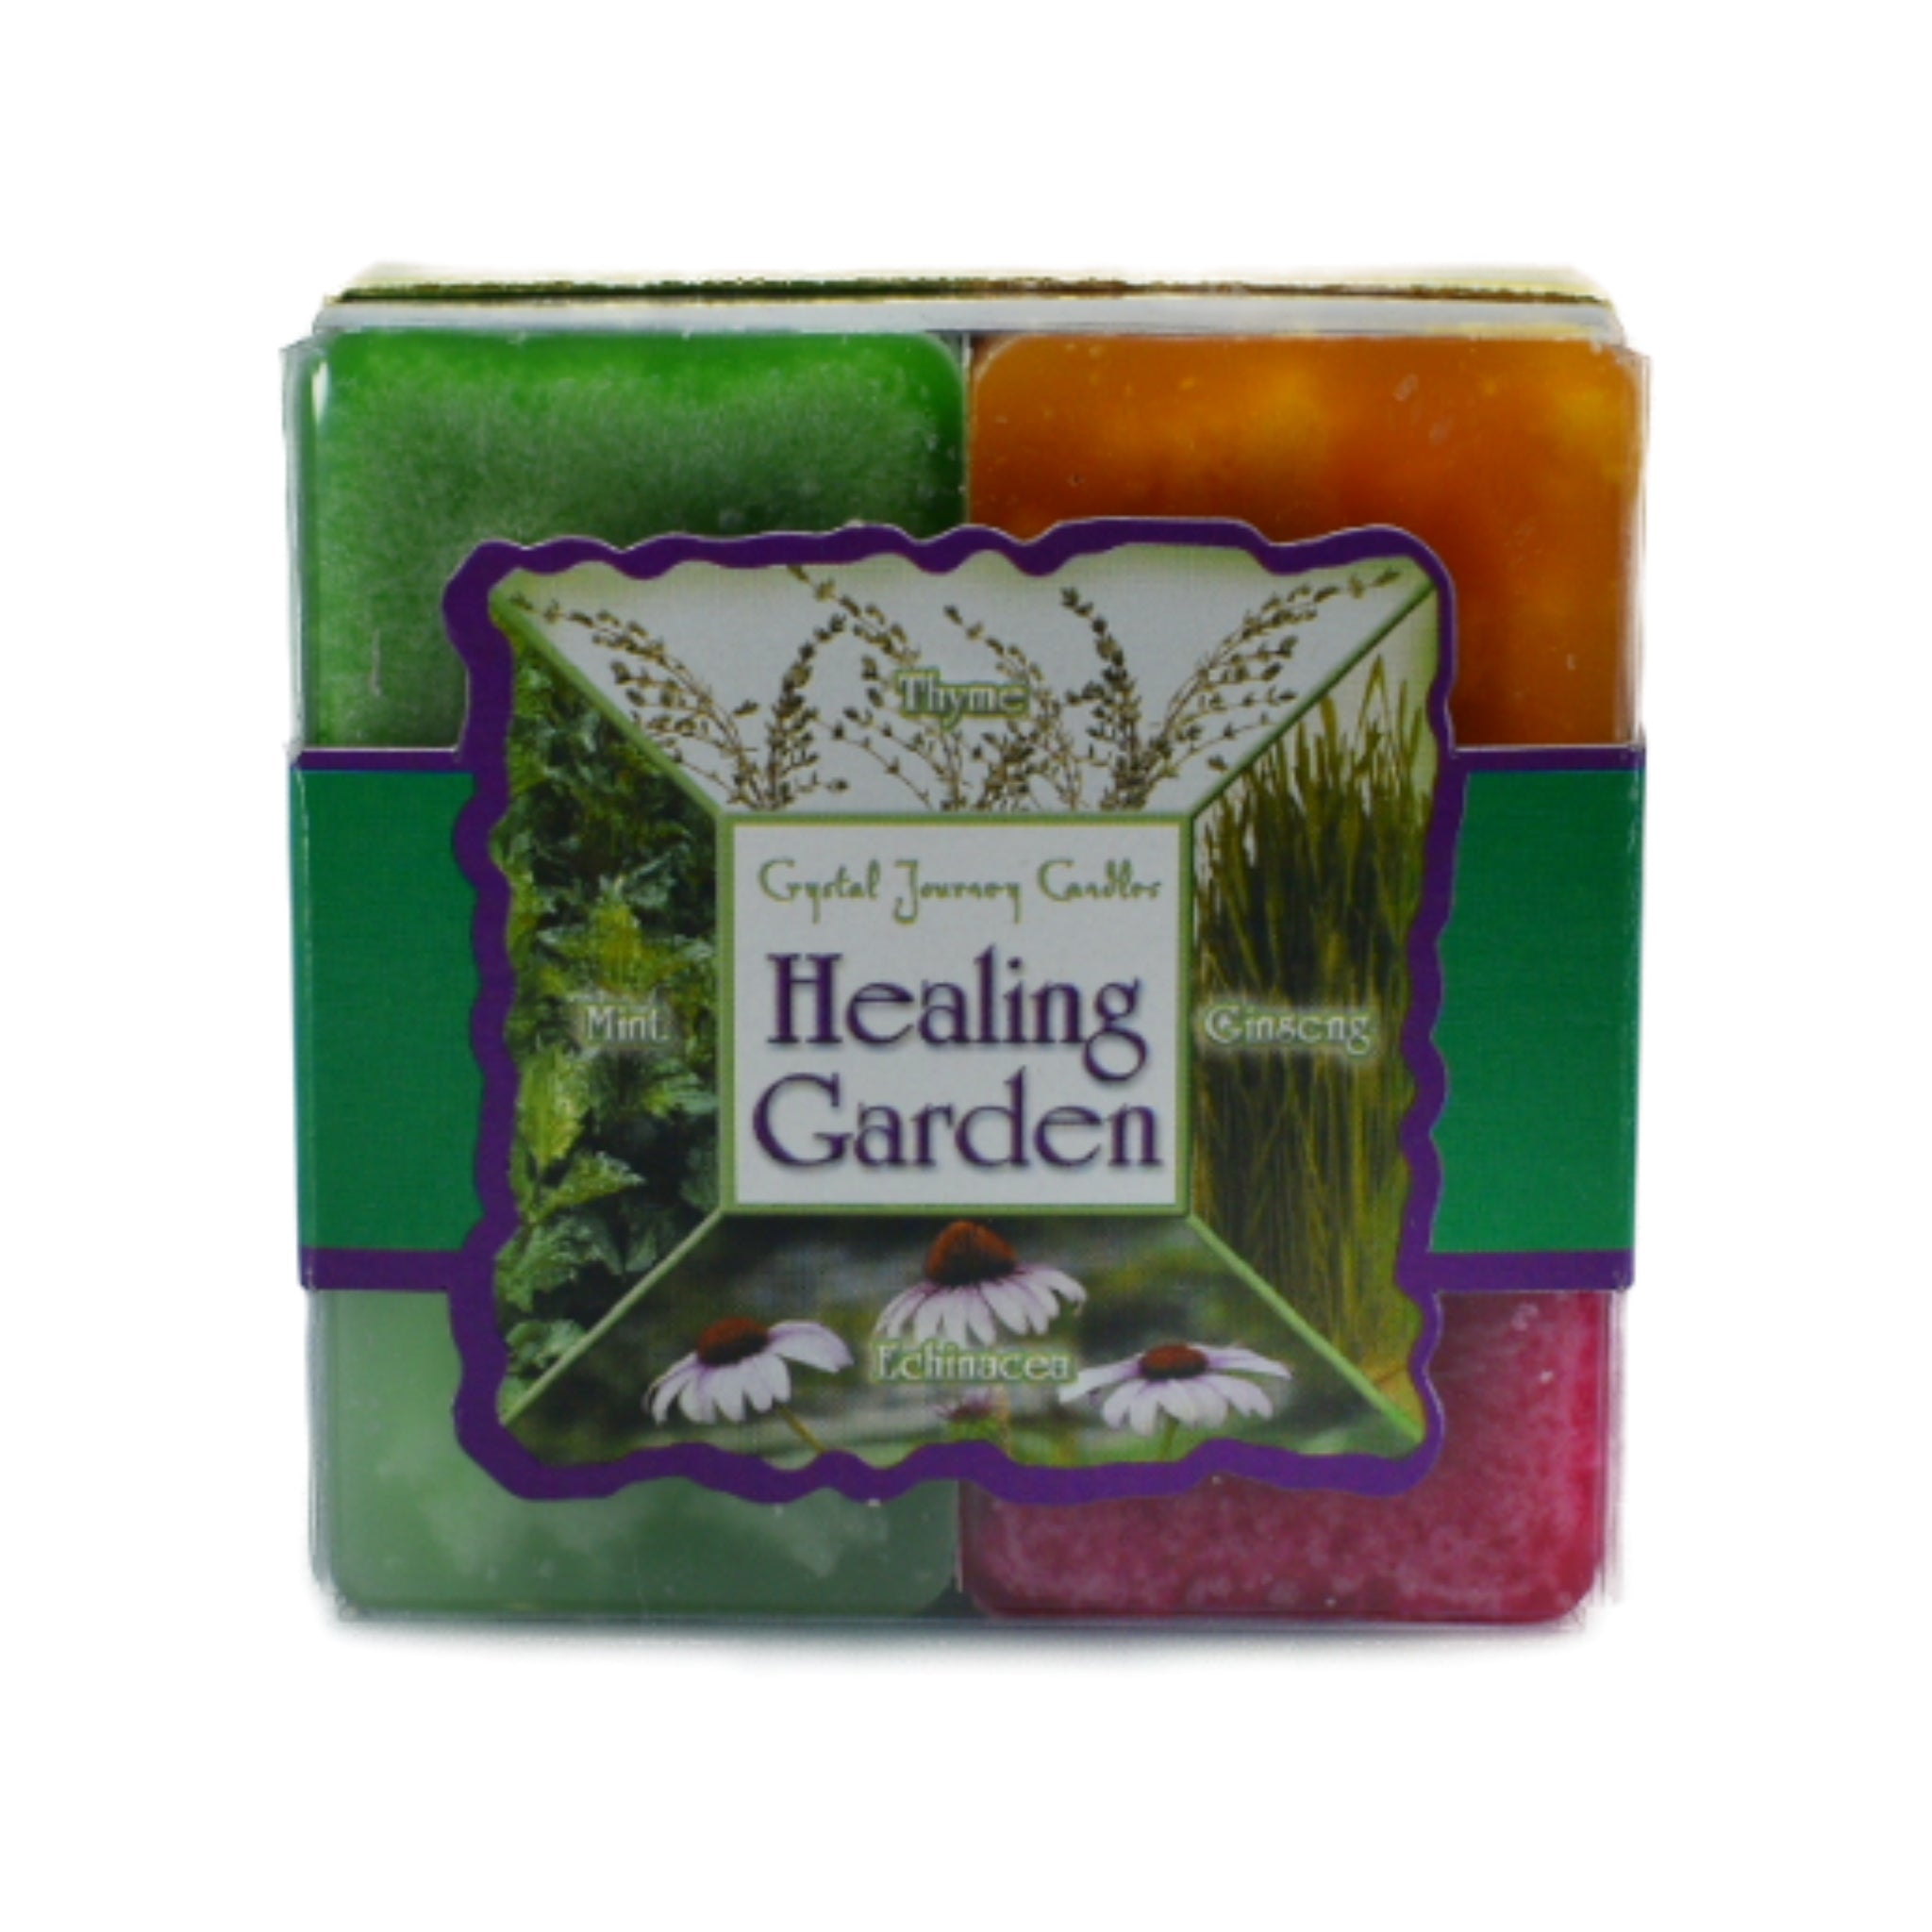 Healing Garden Square Pack Candle.  Light these candles to create their own therapeutic garden for healing qualities.  These candles are scented with Thyme, Mint, Ginseng and Echinacea from around the world.  